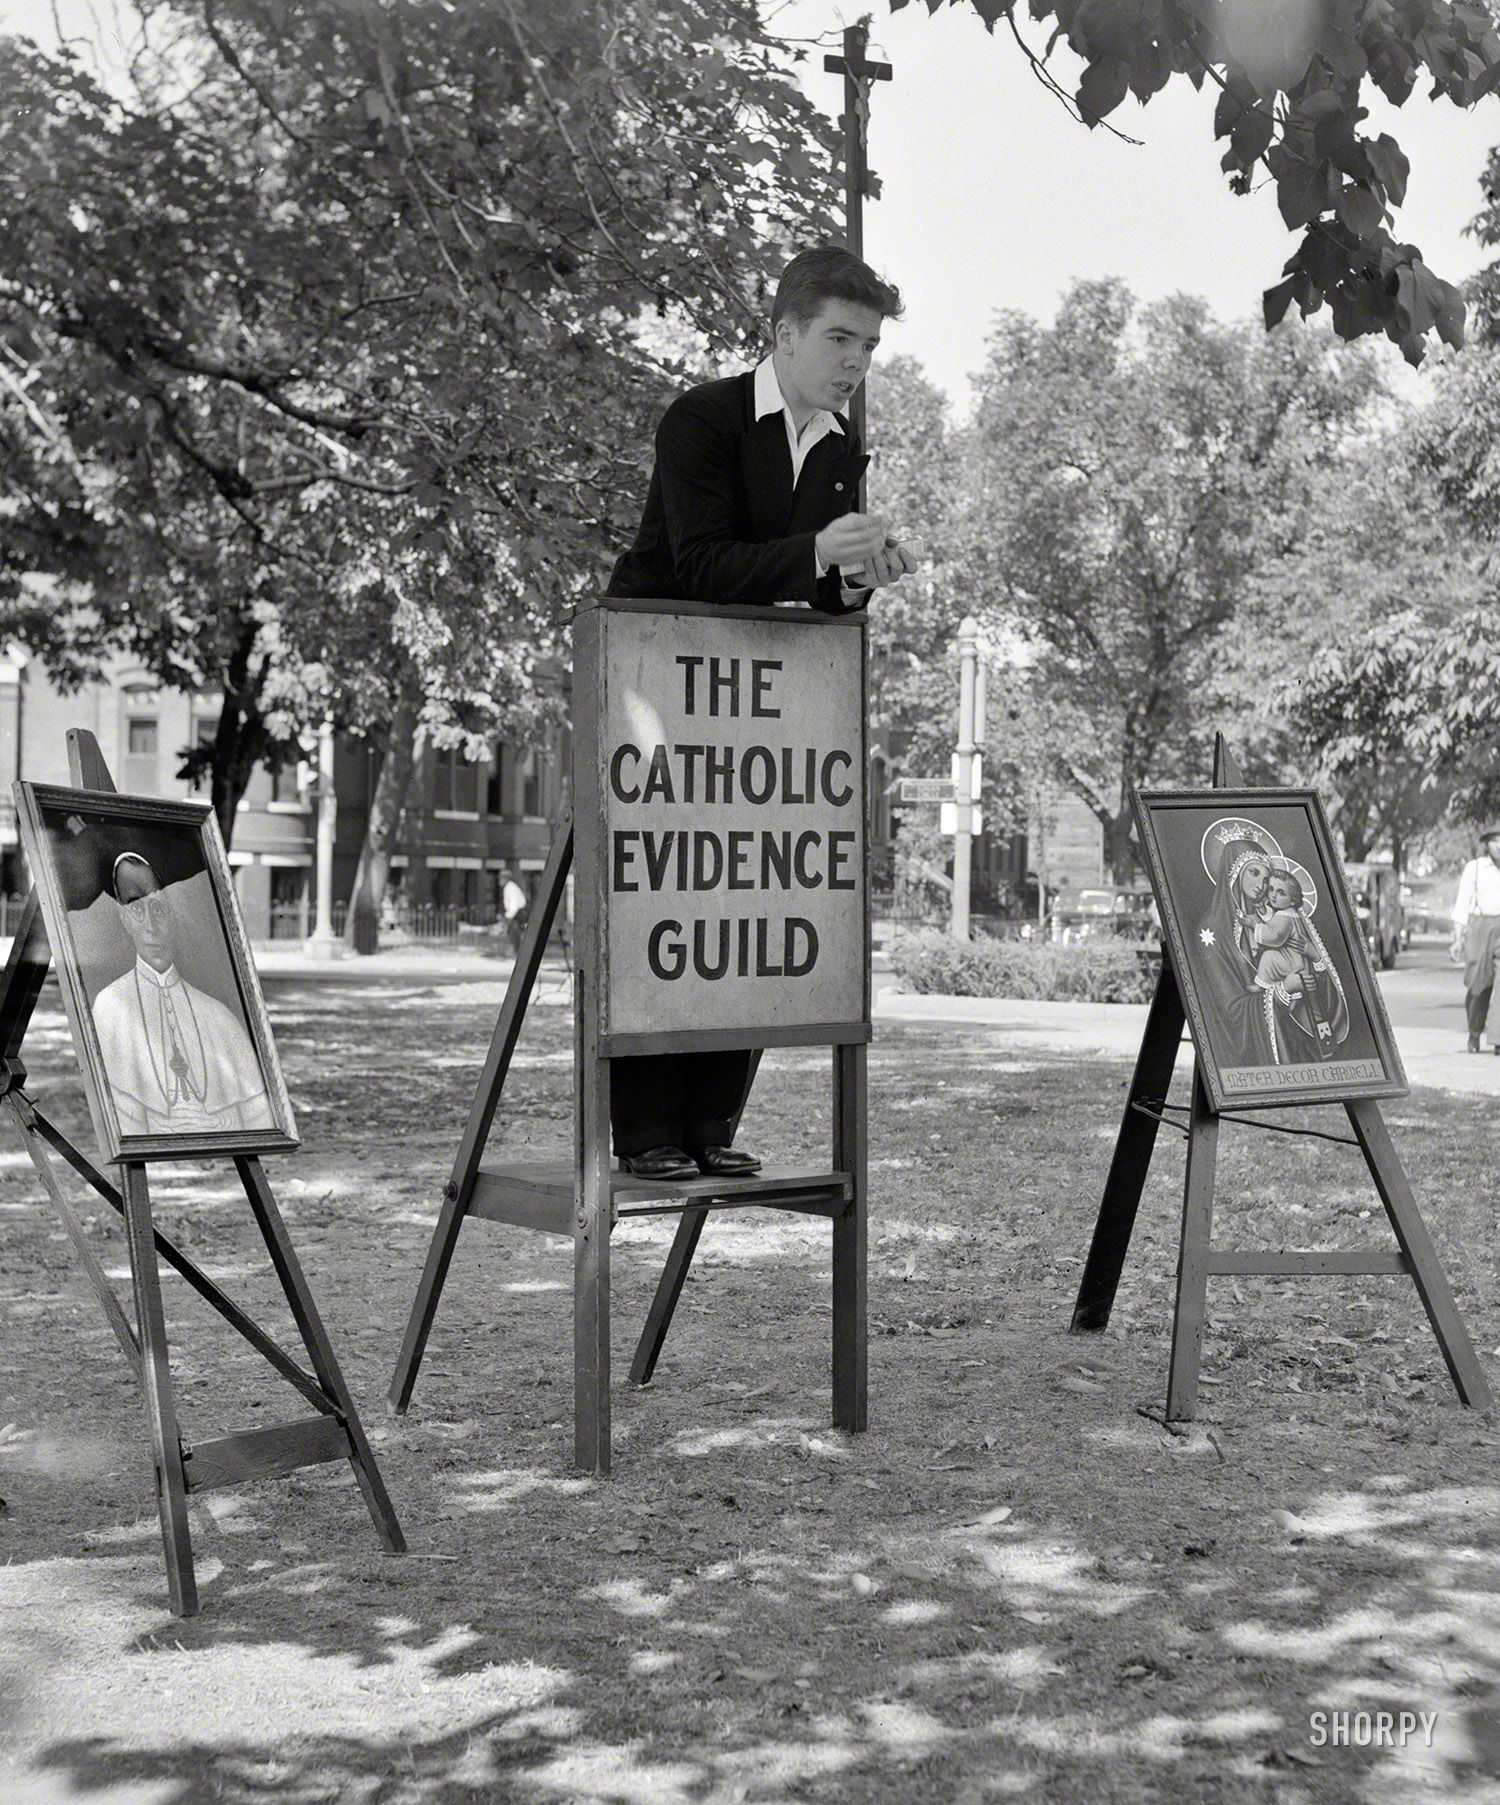 July 1943. Washington, D.C. "Member of the Catholic Evidence Guild speaking in Logan Circle." Photo by Joseph Horne, Office of War Information. View full size.